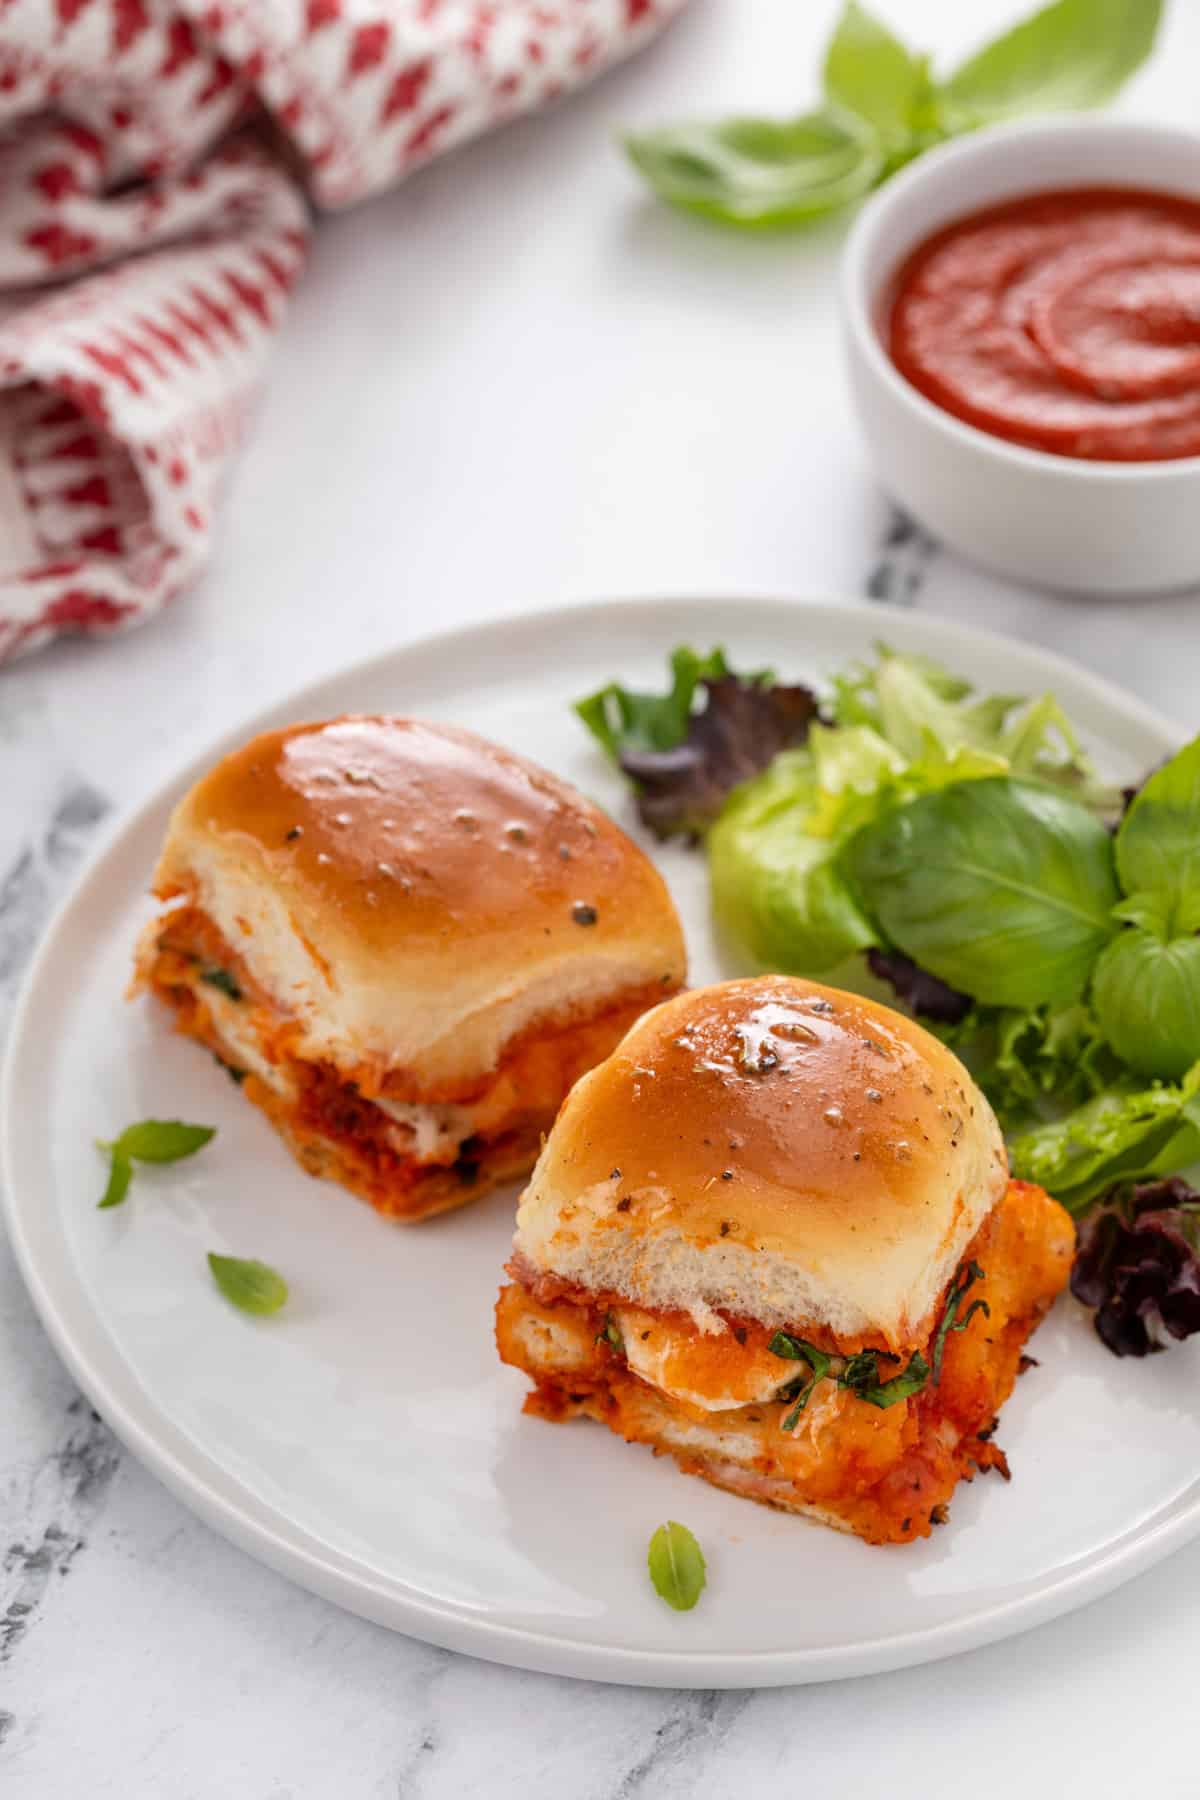 Two chicken parmesan sliders next to a green salad on a white plate.